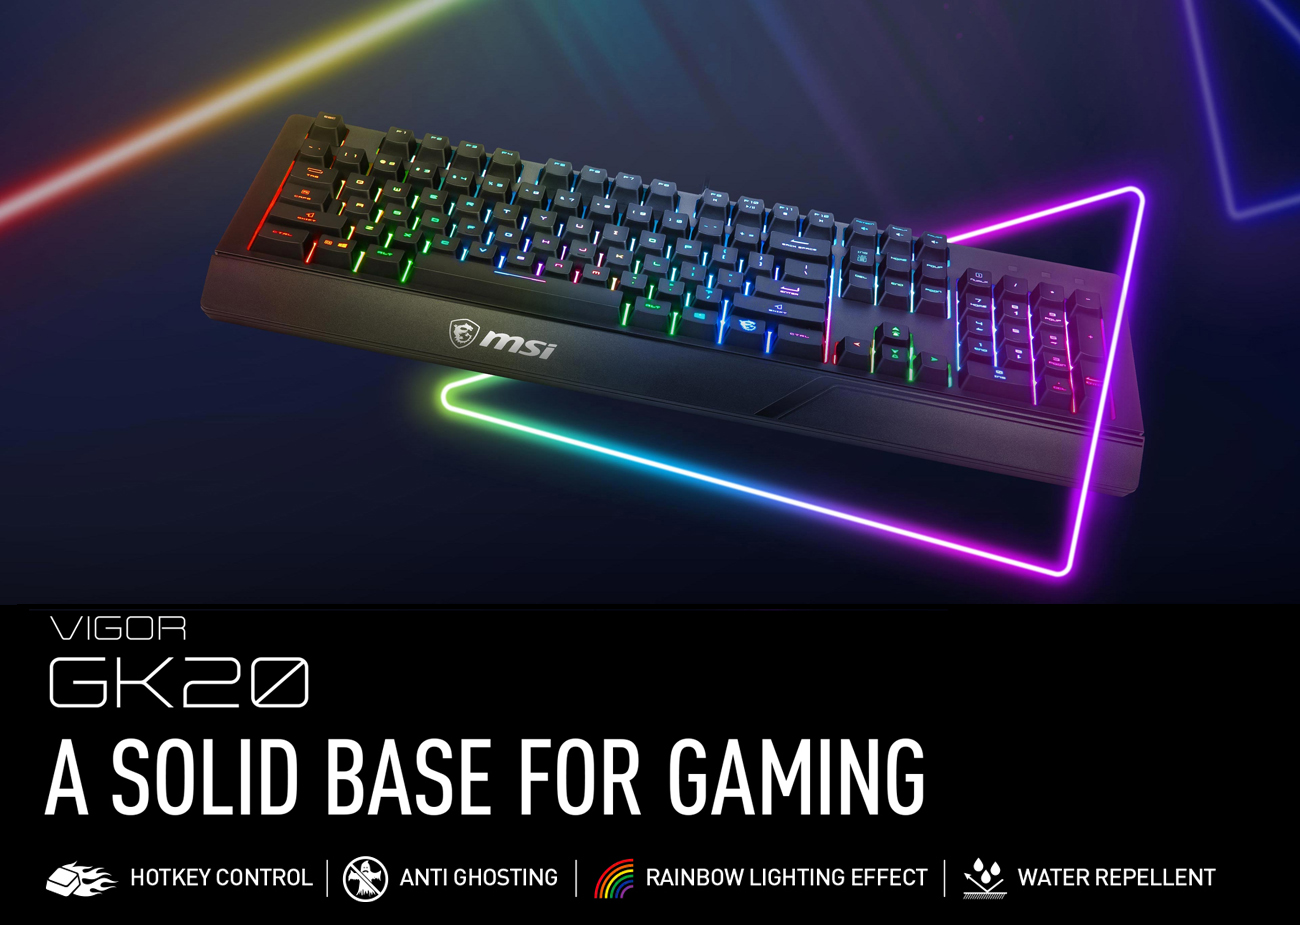 gaming keyboard from expert zone